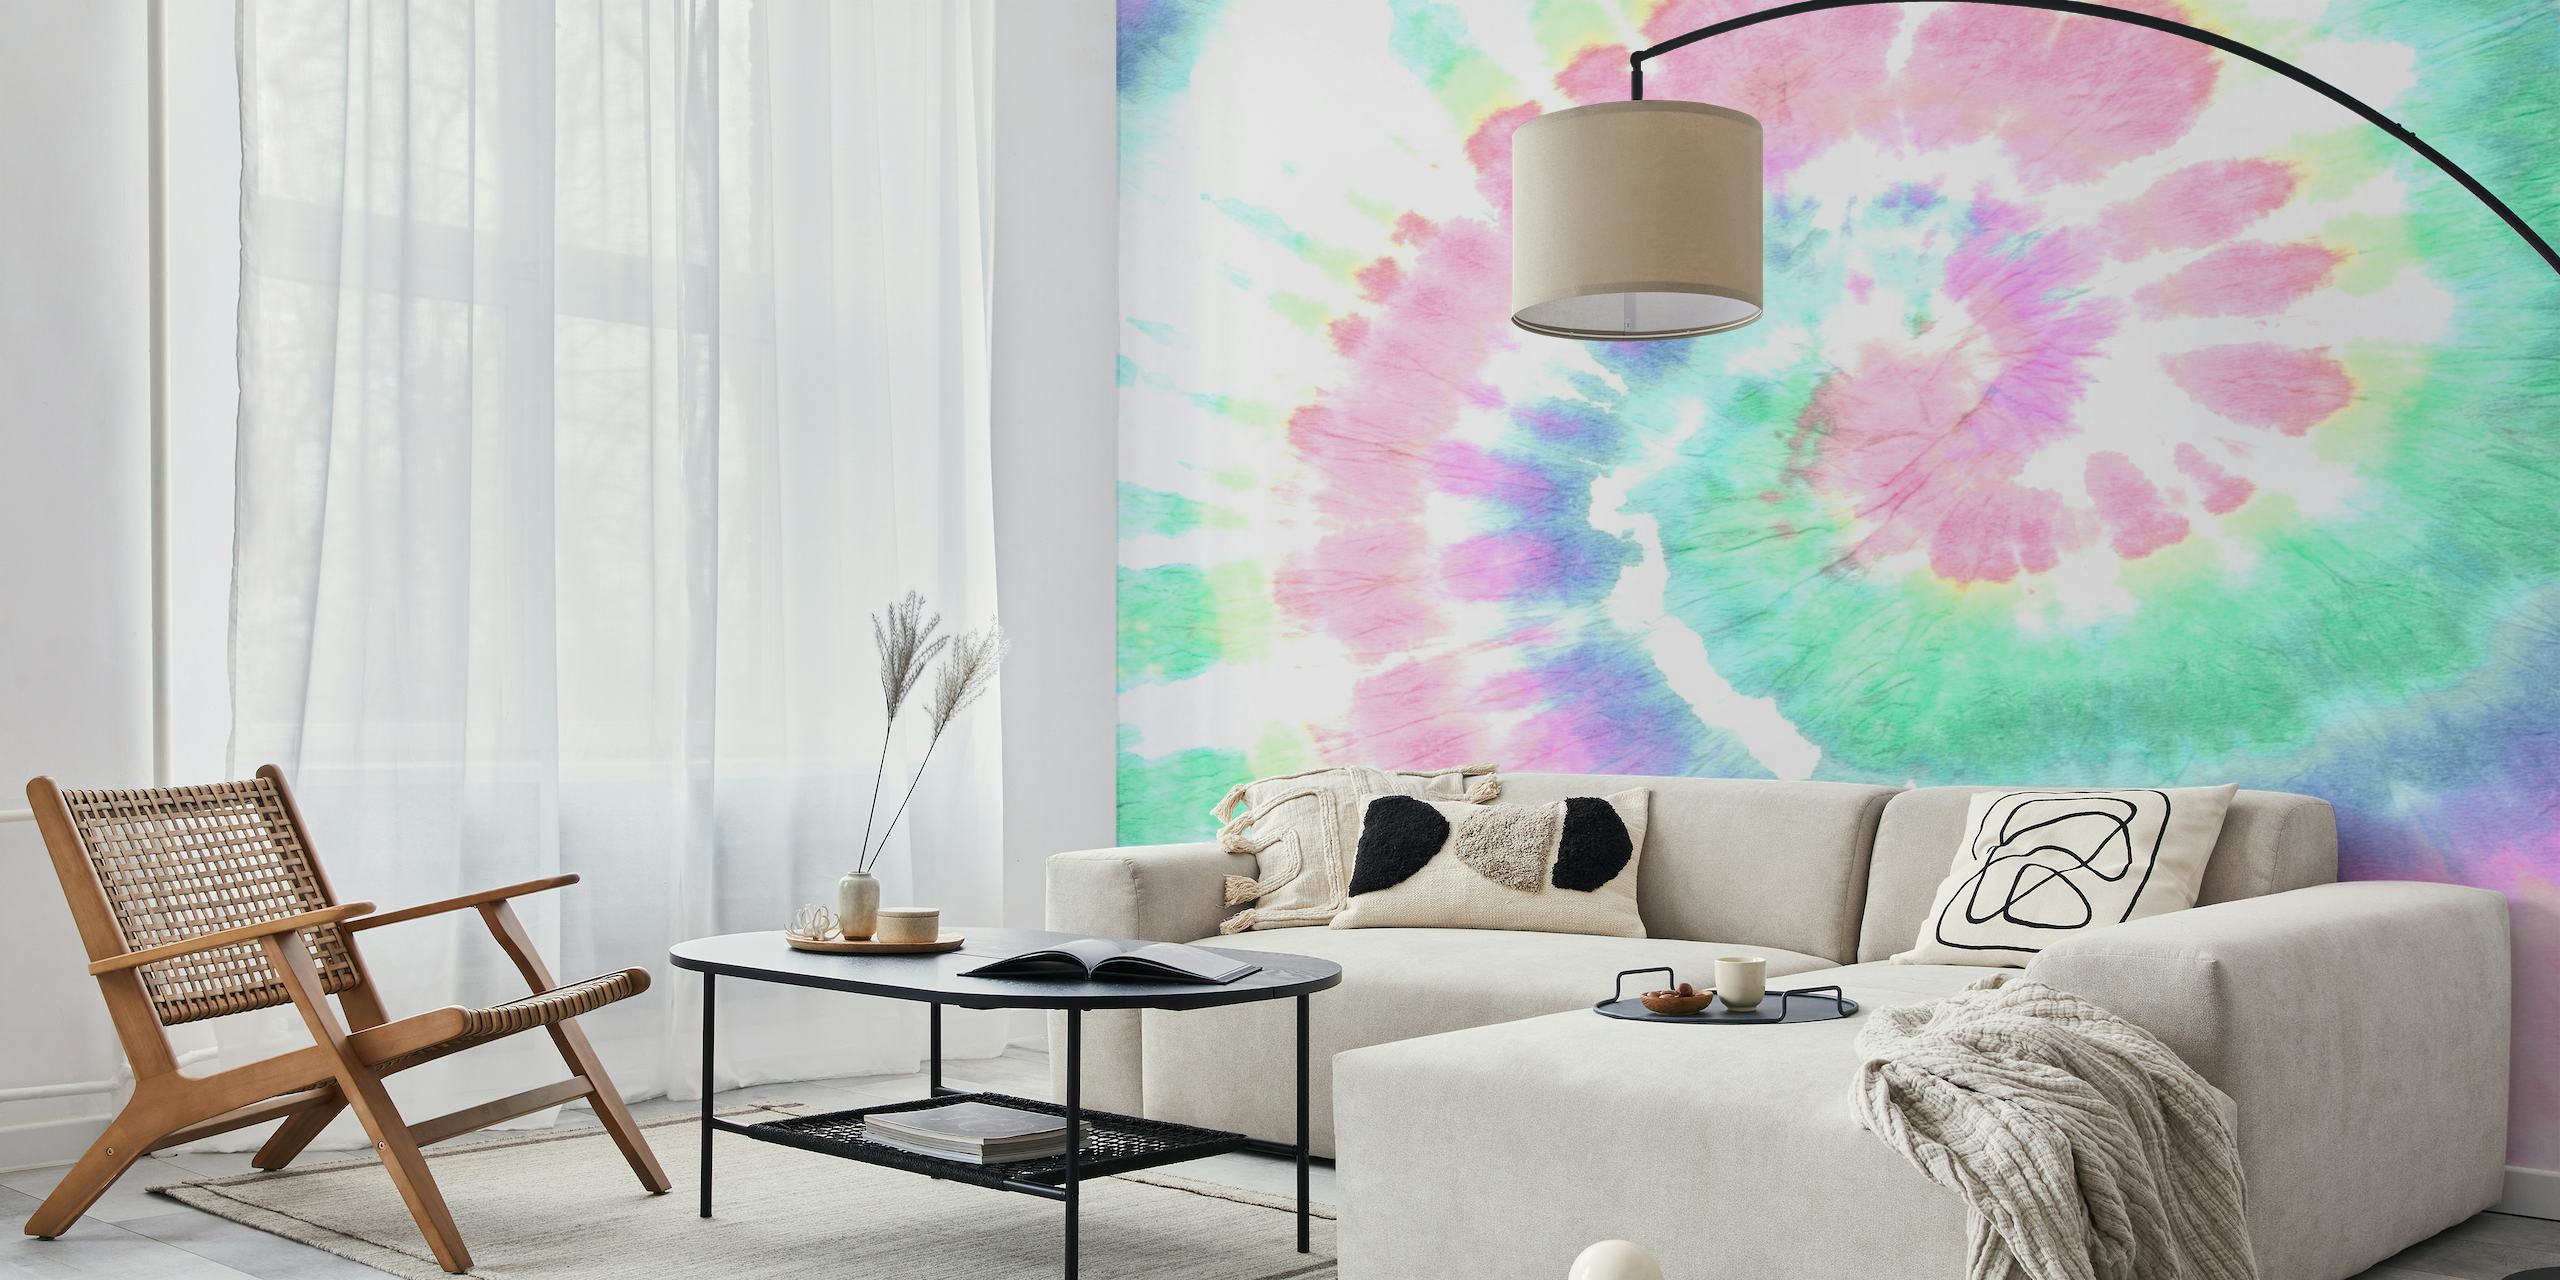 Energetic Pink Tie Dye wall mural with swirls of pink, green, and blue